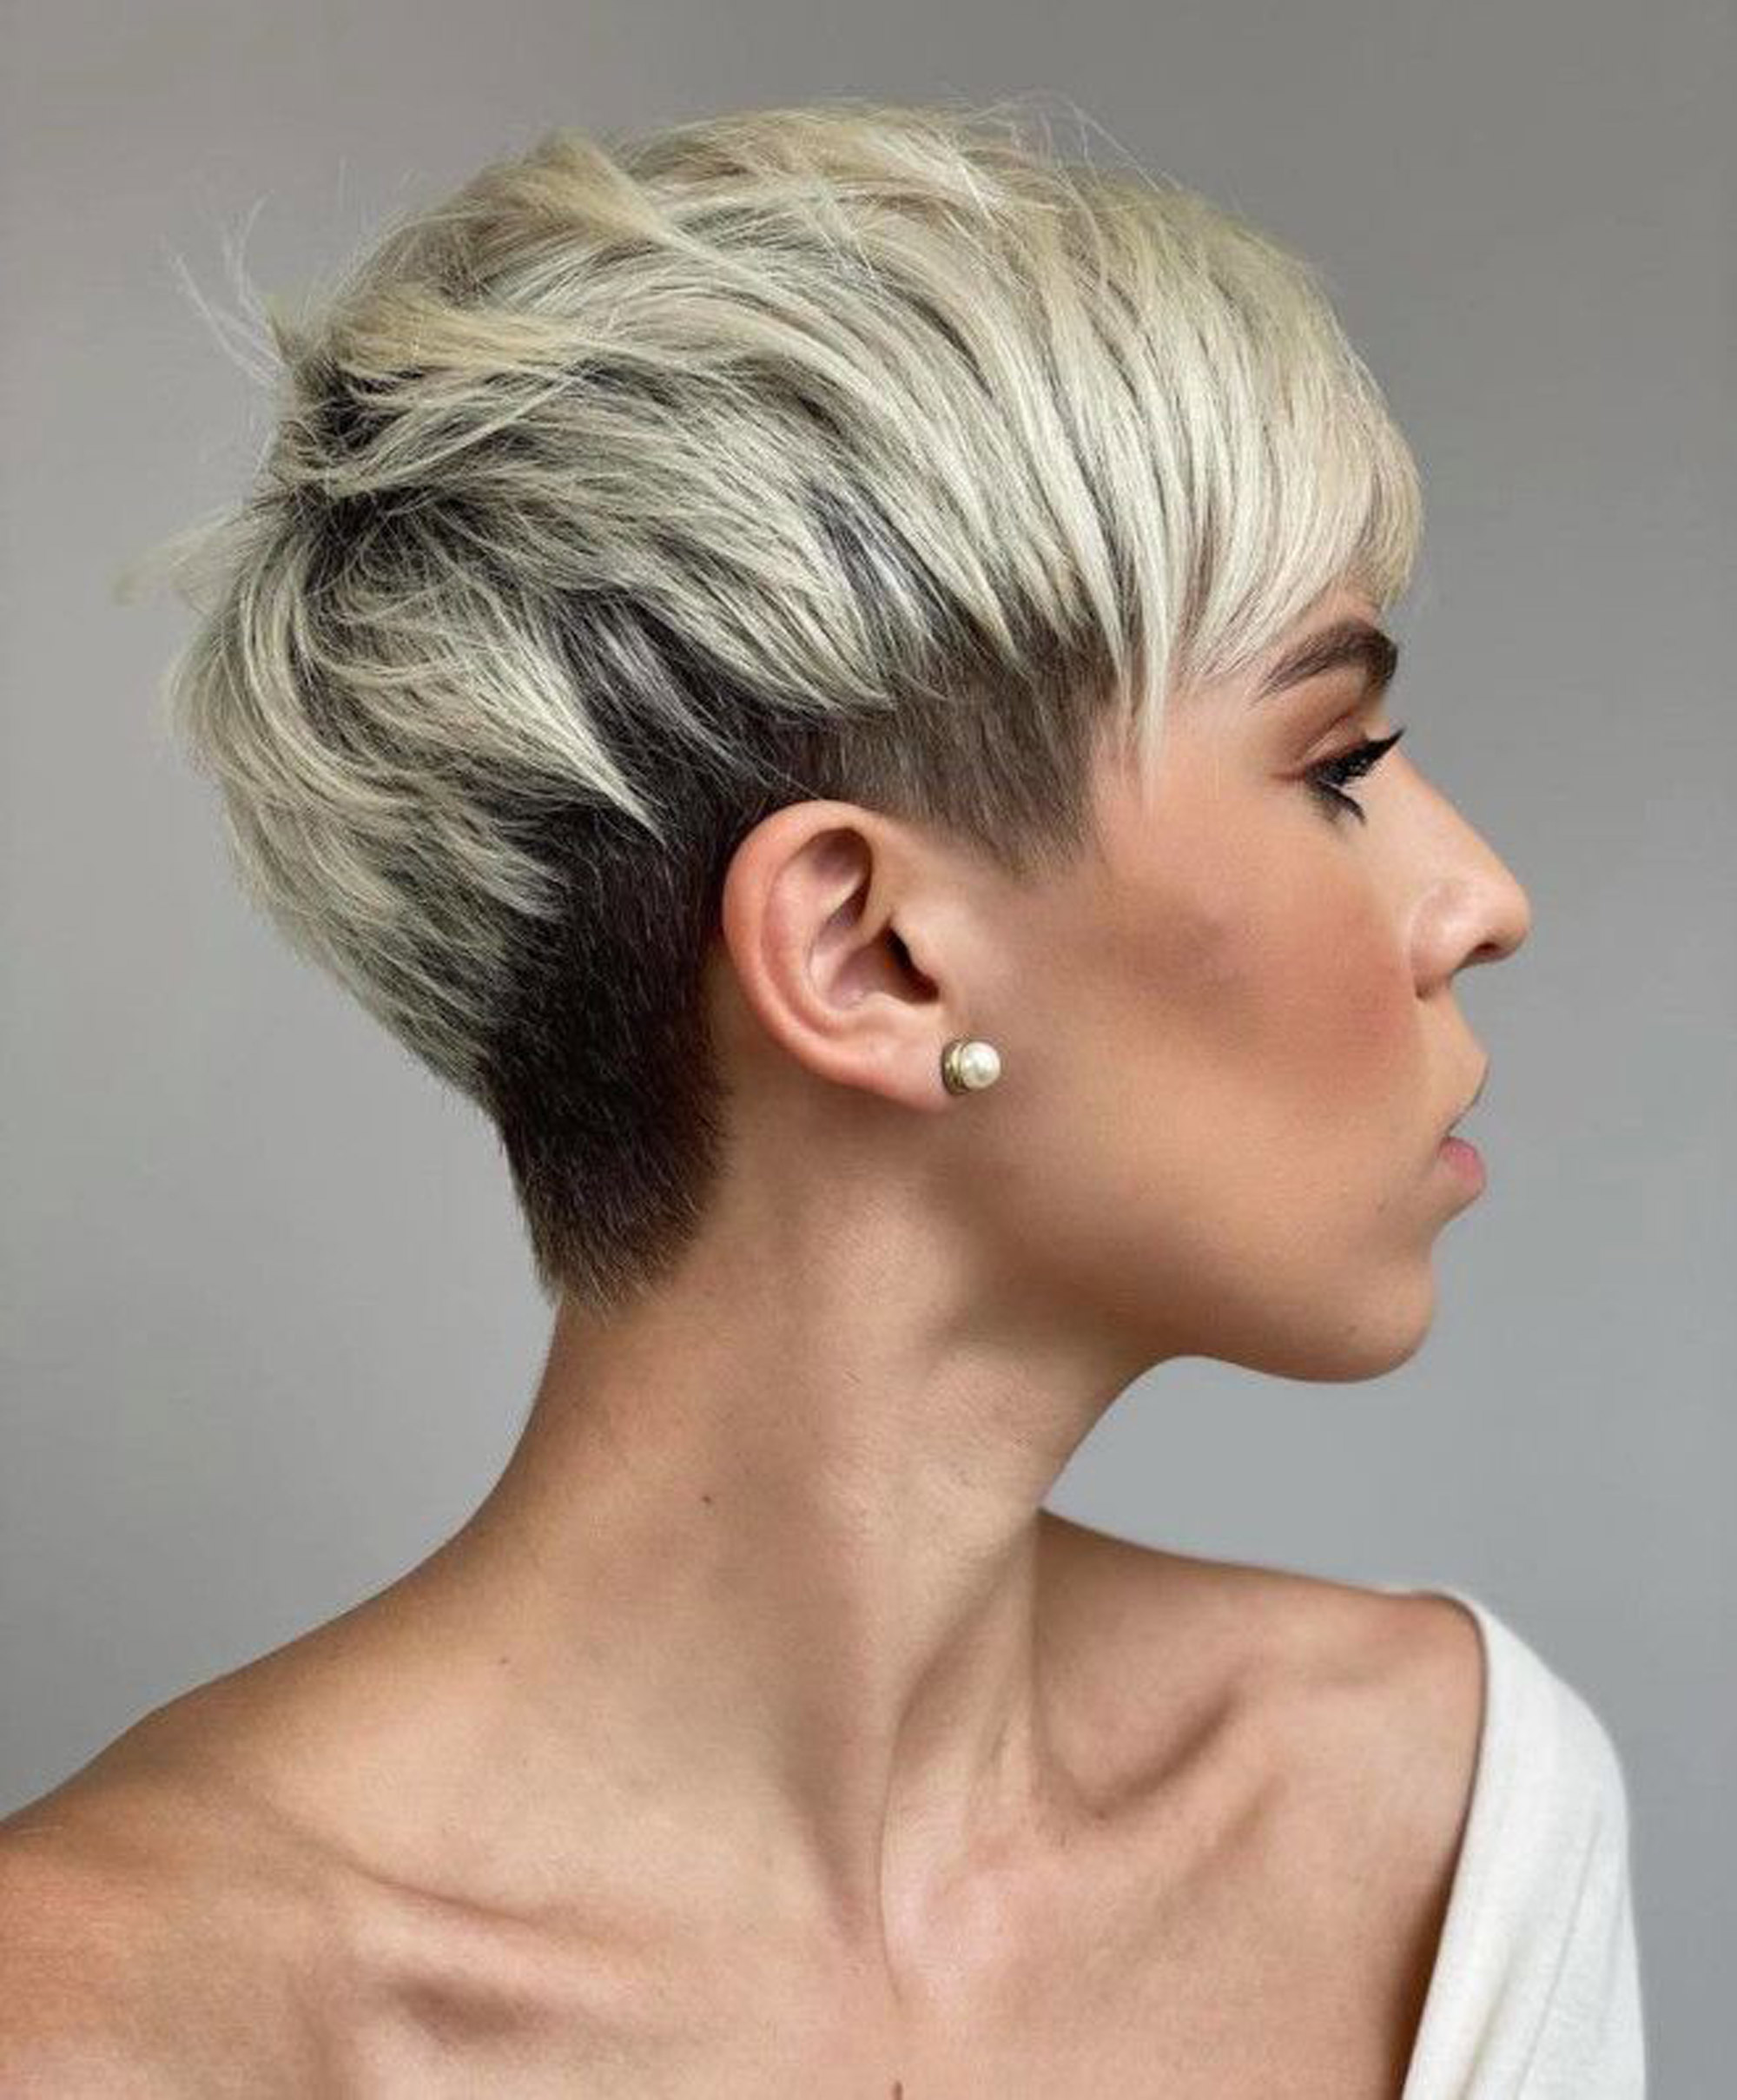 Black Womens Short Haircuts: 30 Cropped Hairstyles to Try | All Things Hair  US